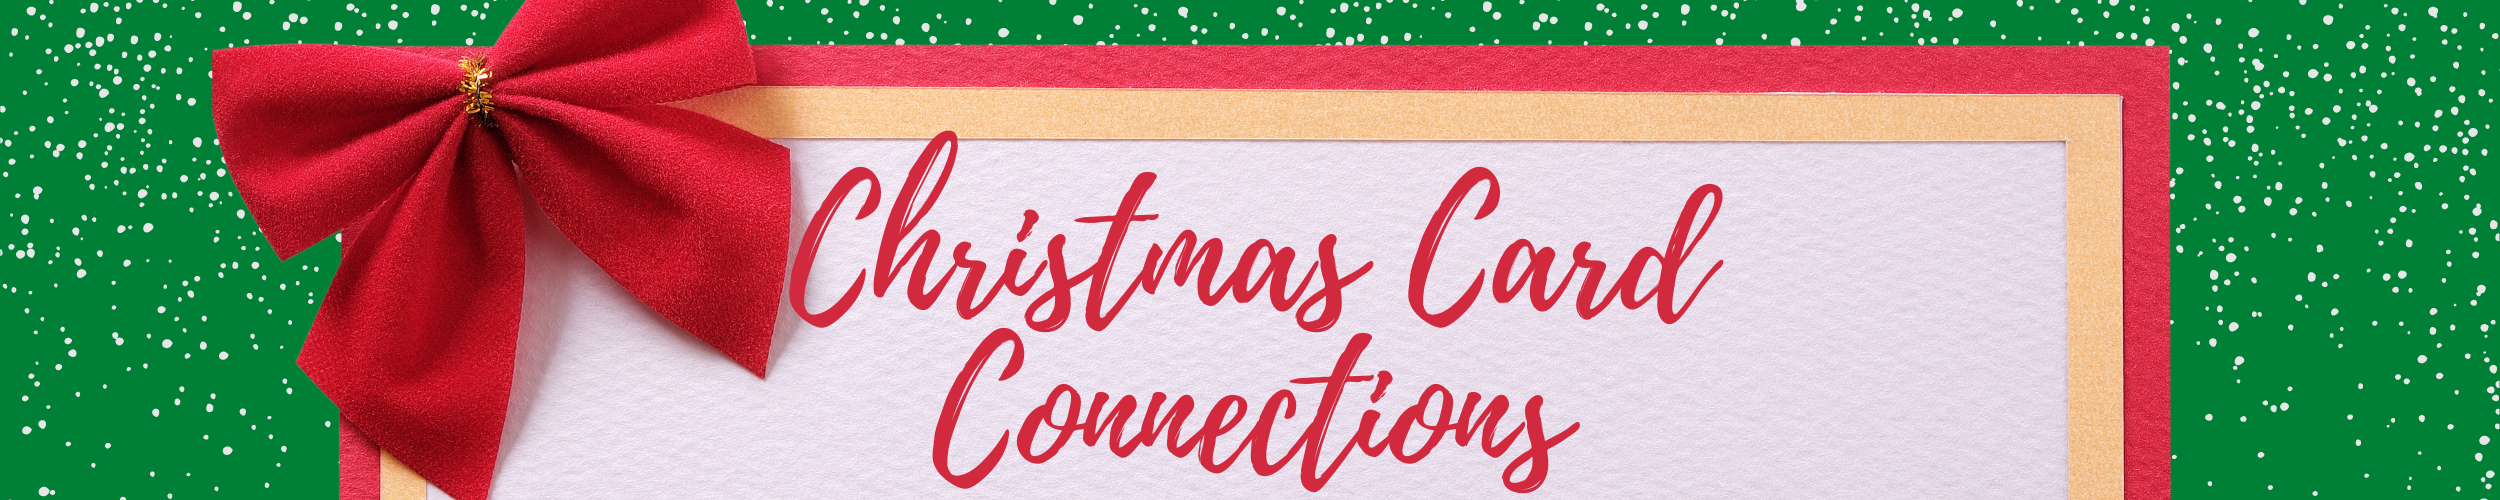 Christmas Card Connections